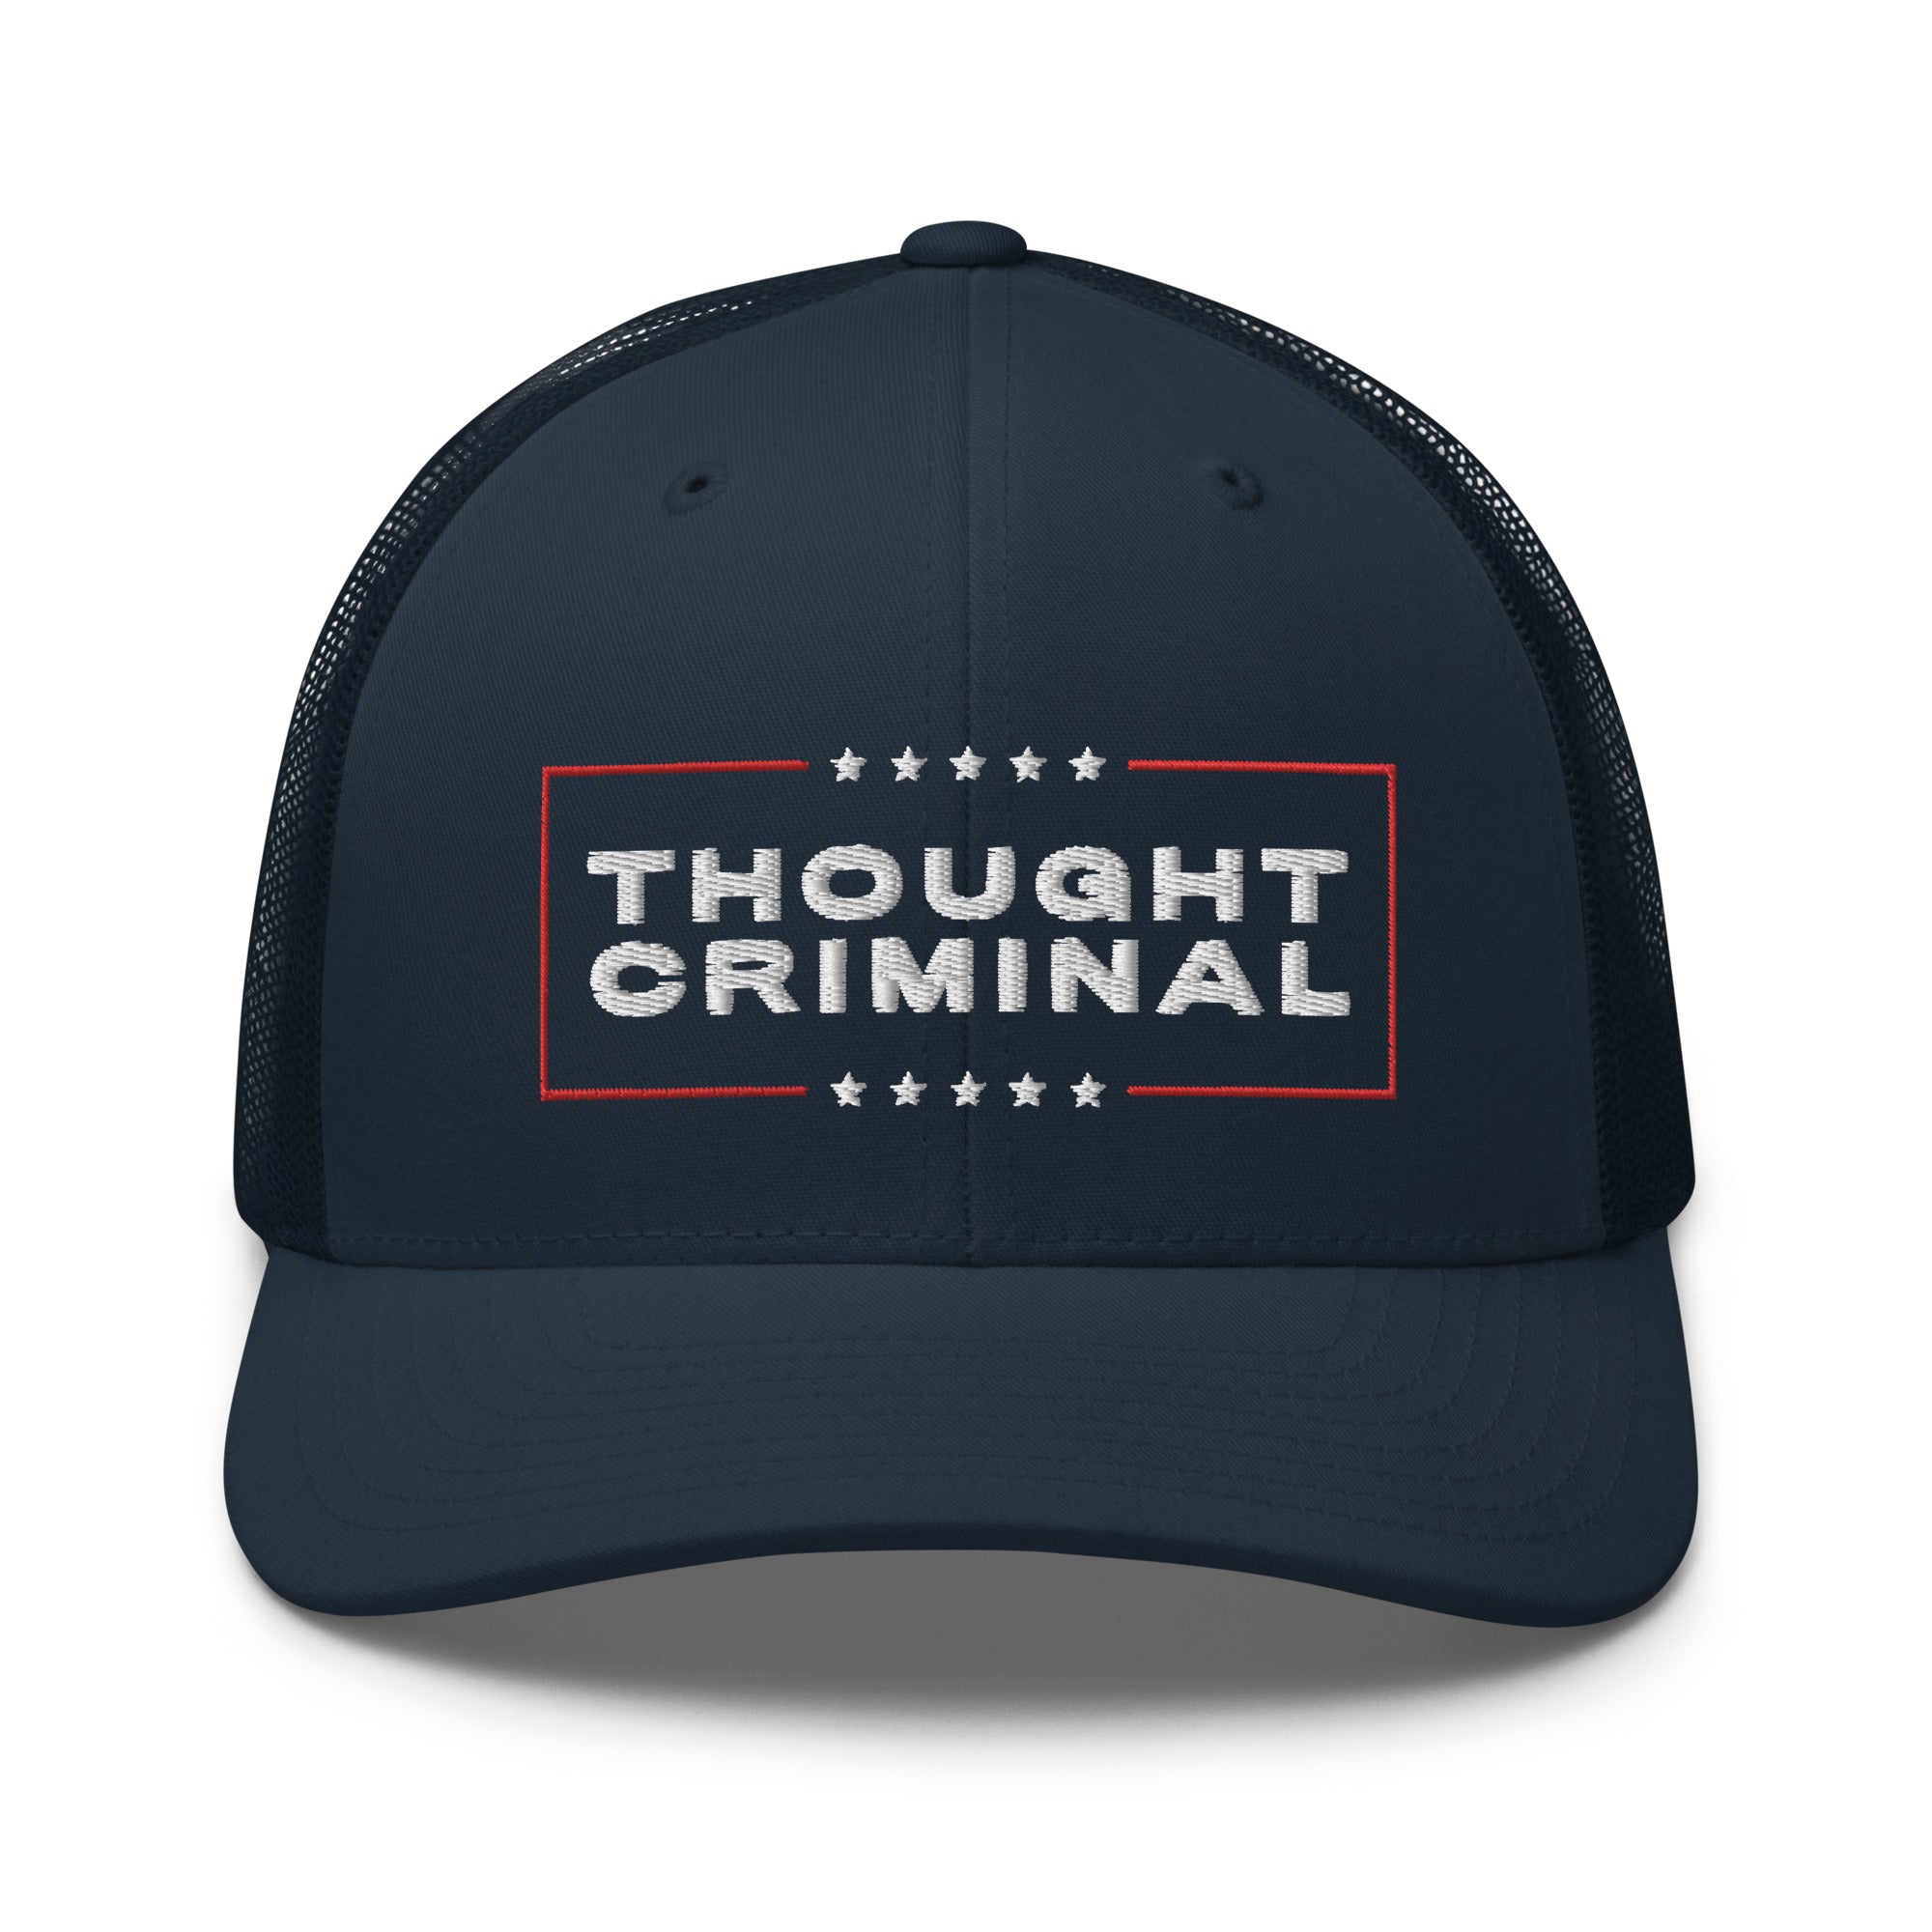 Thought Criminal Campaign Trucker Cap